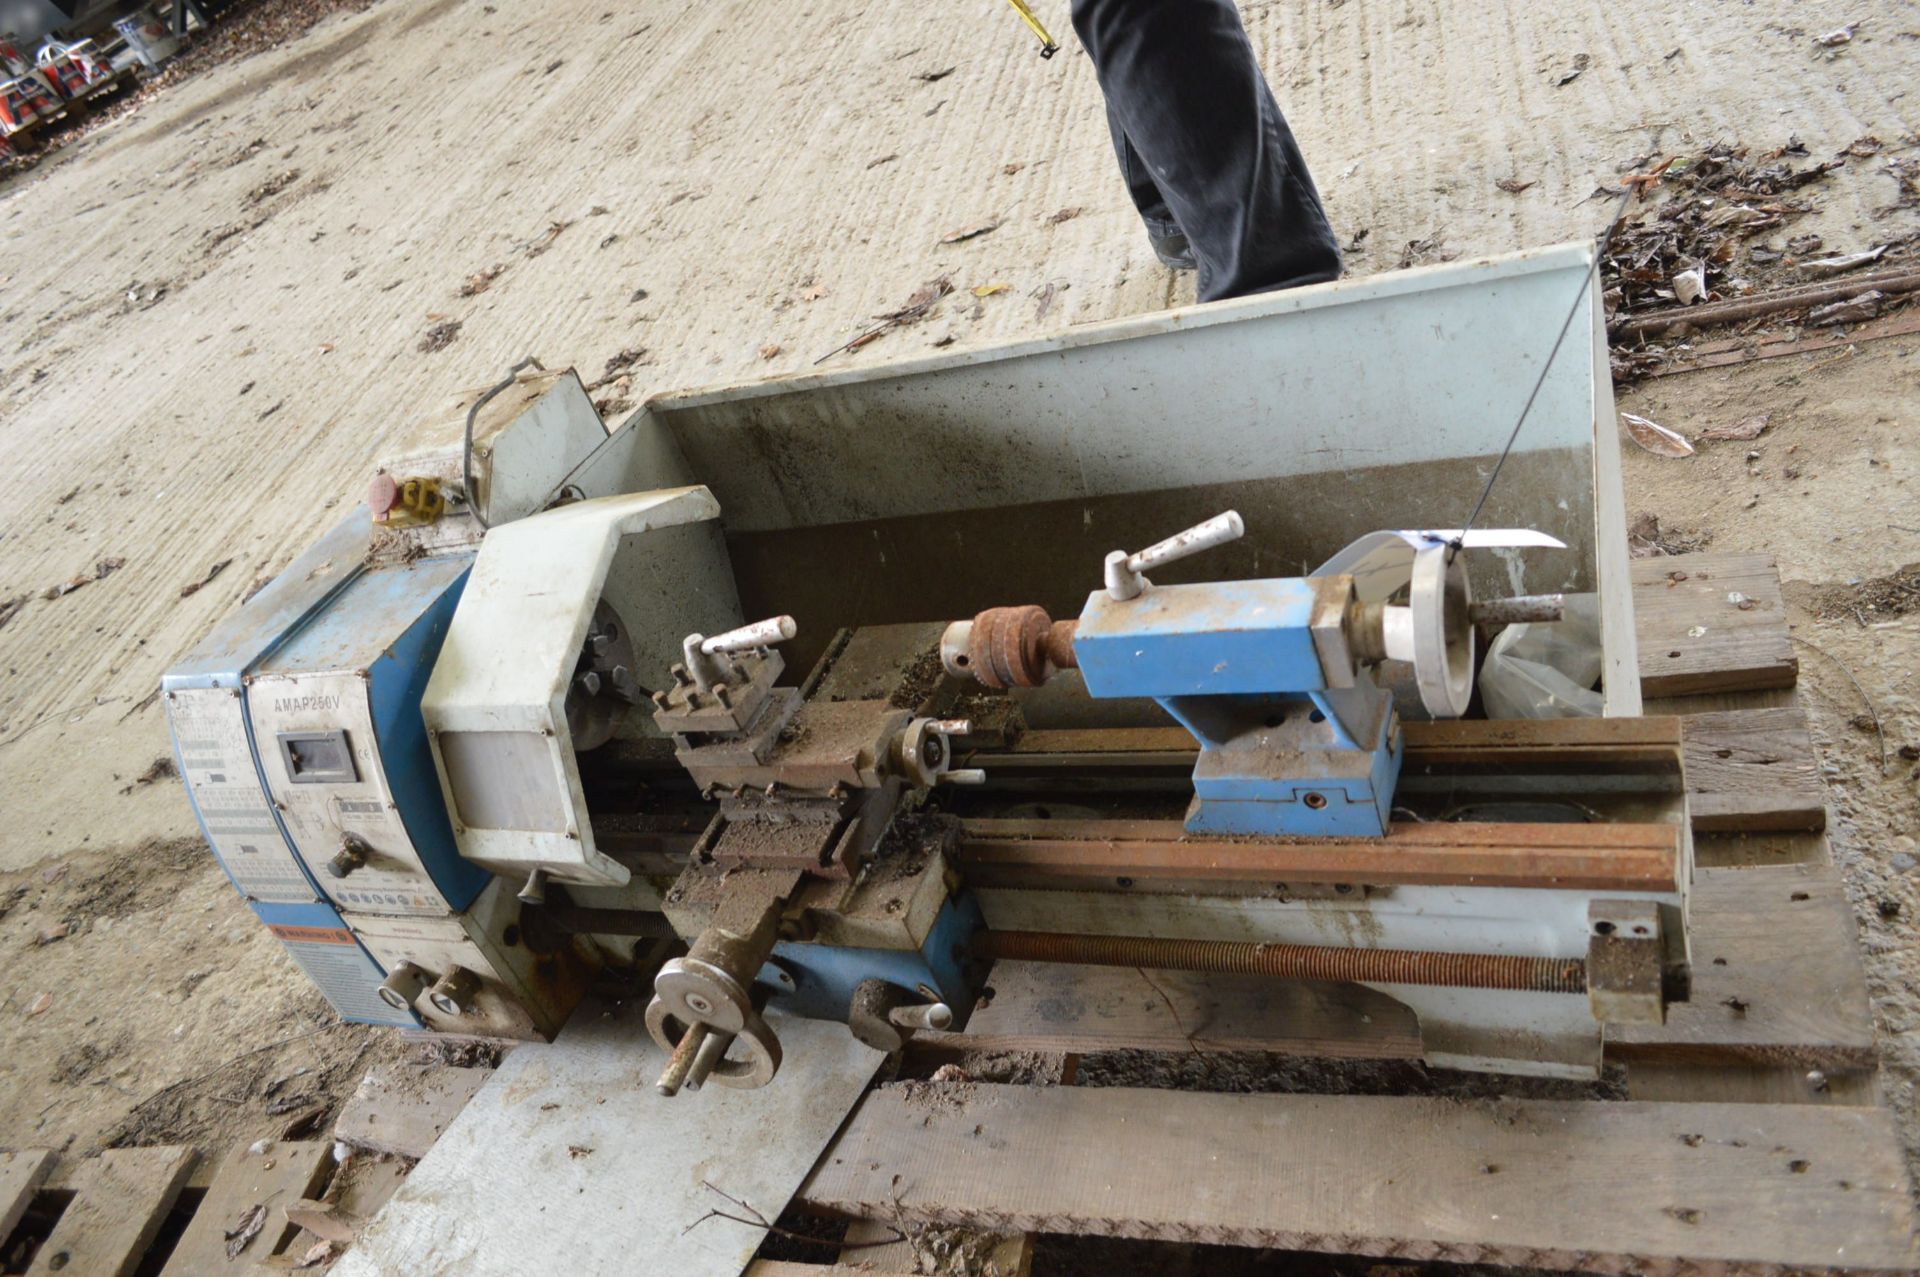 AMAP250V Bench Lathe, approx. 250mm swing x 500mm between centres, 240V